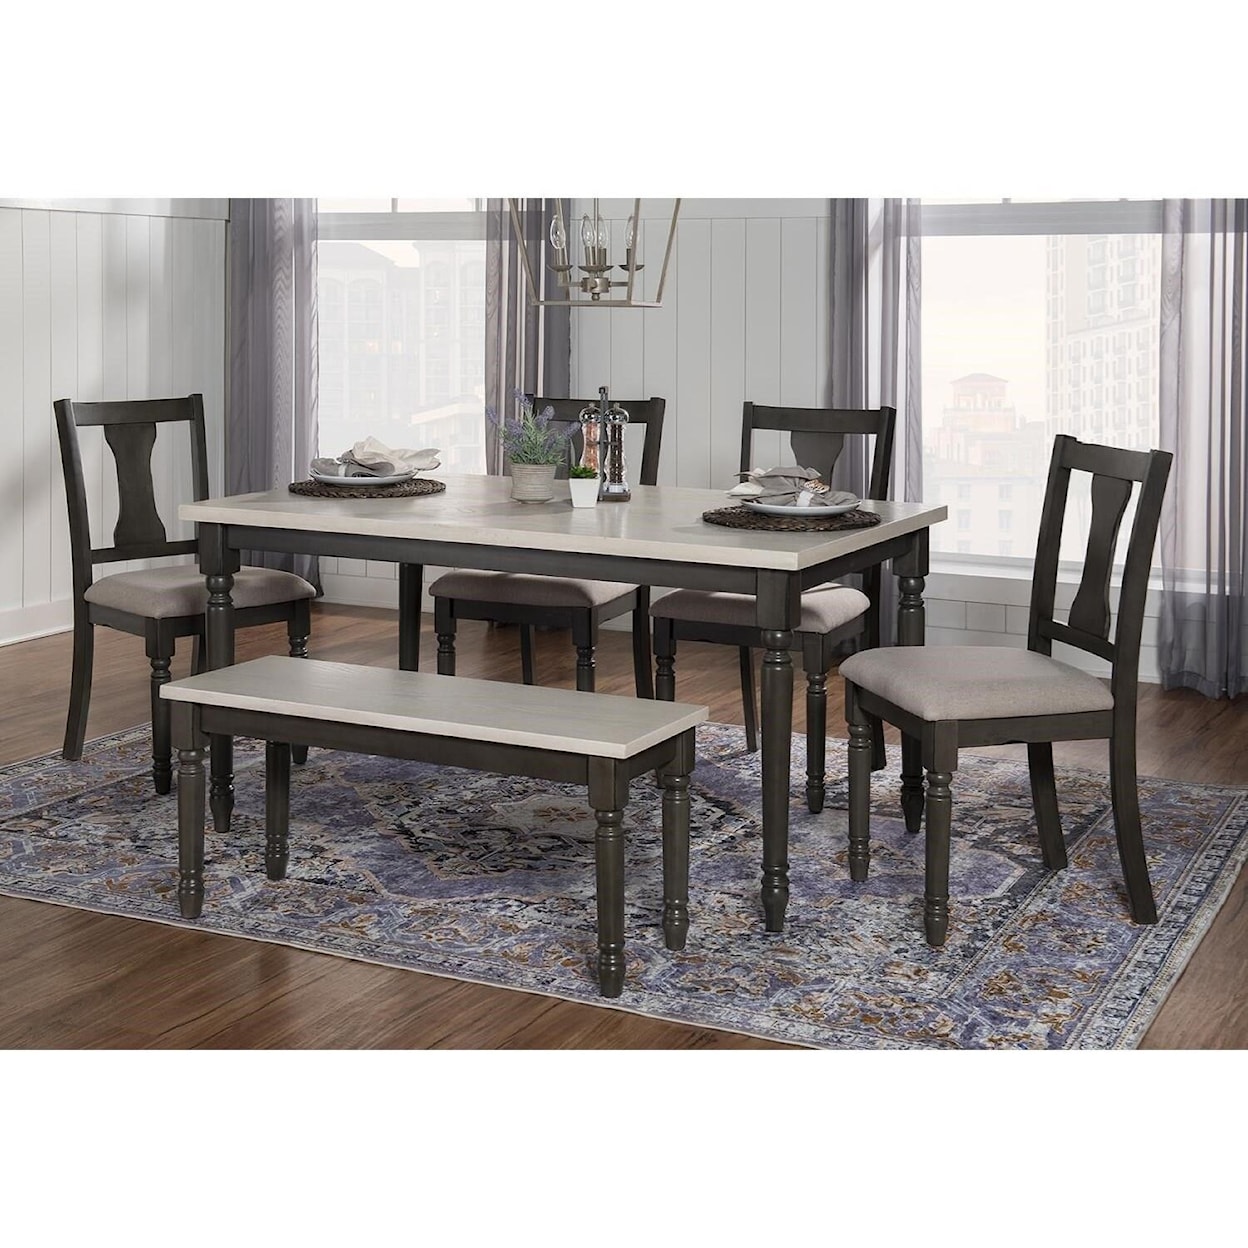 Powell Willow Willow 6 Piece Dining Set